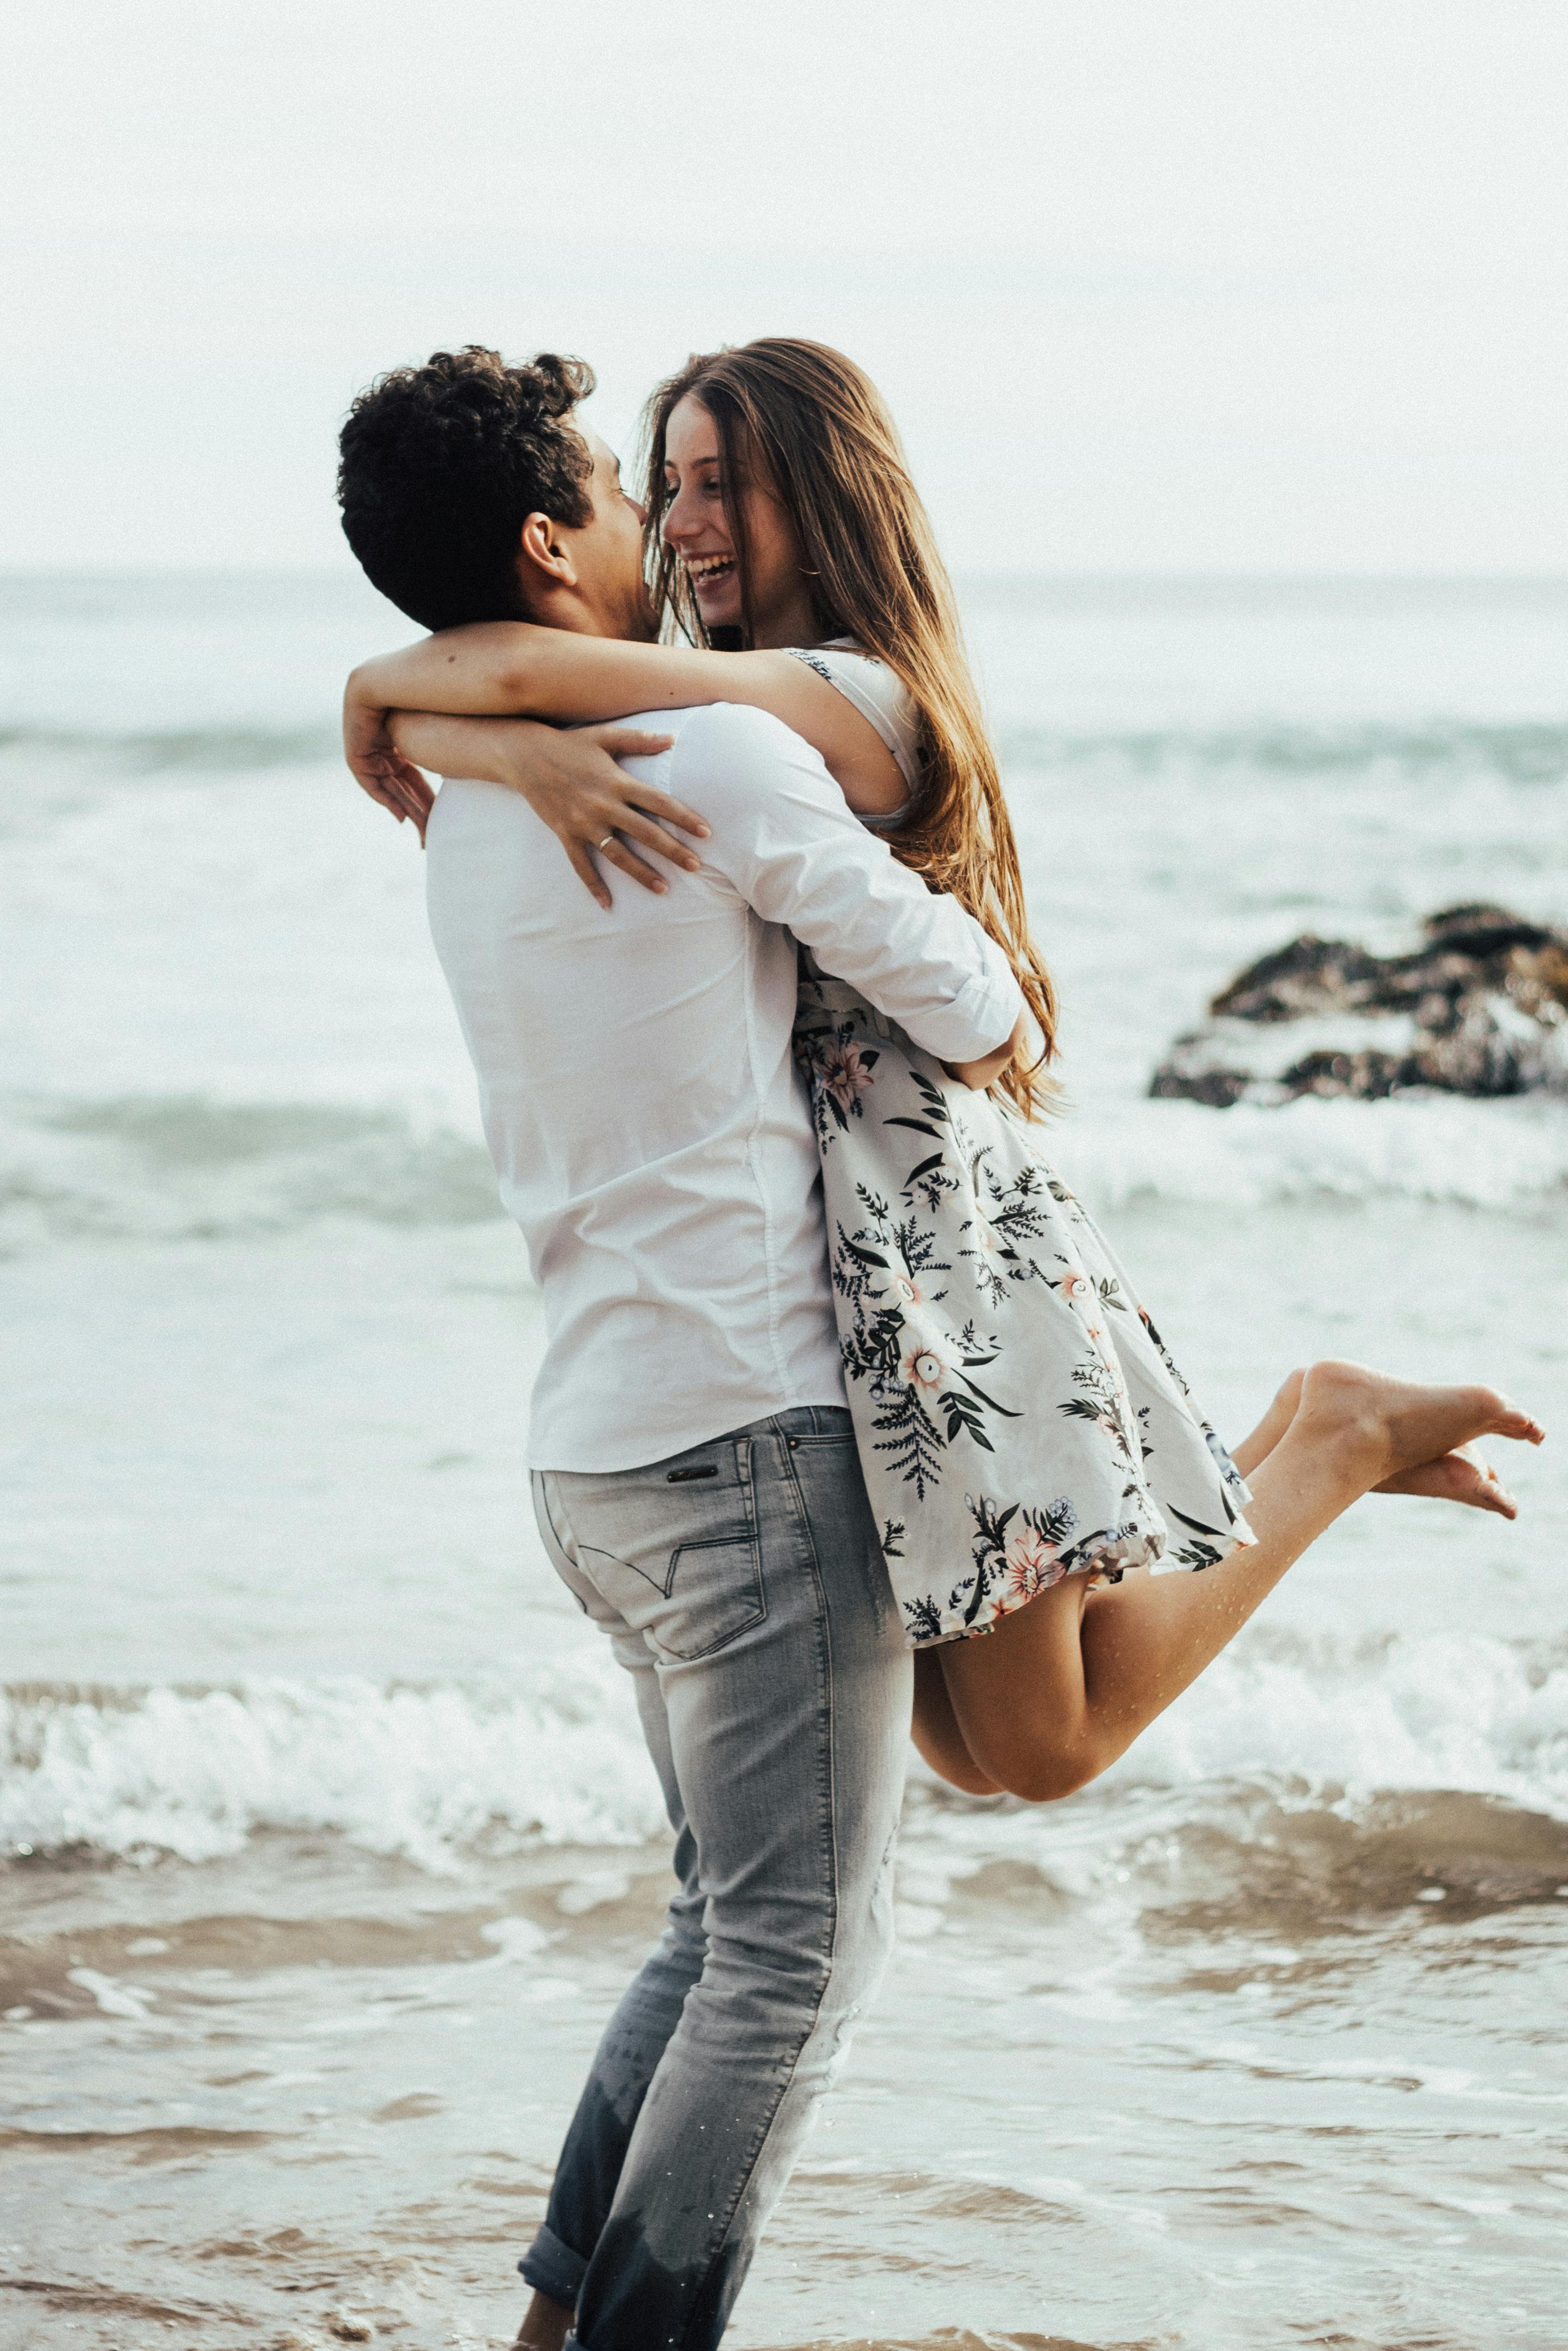 A happy couple embracing at the beach | Source: Pexels